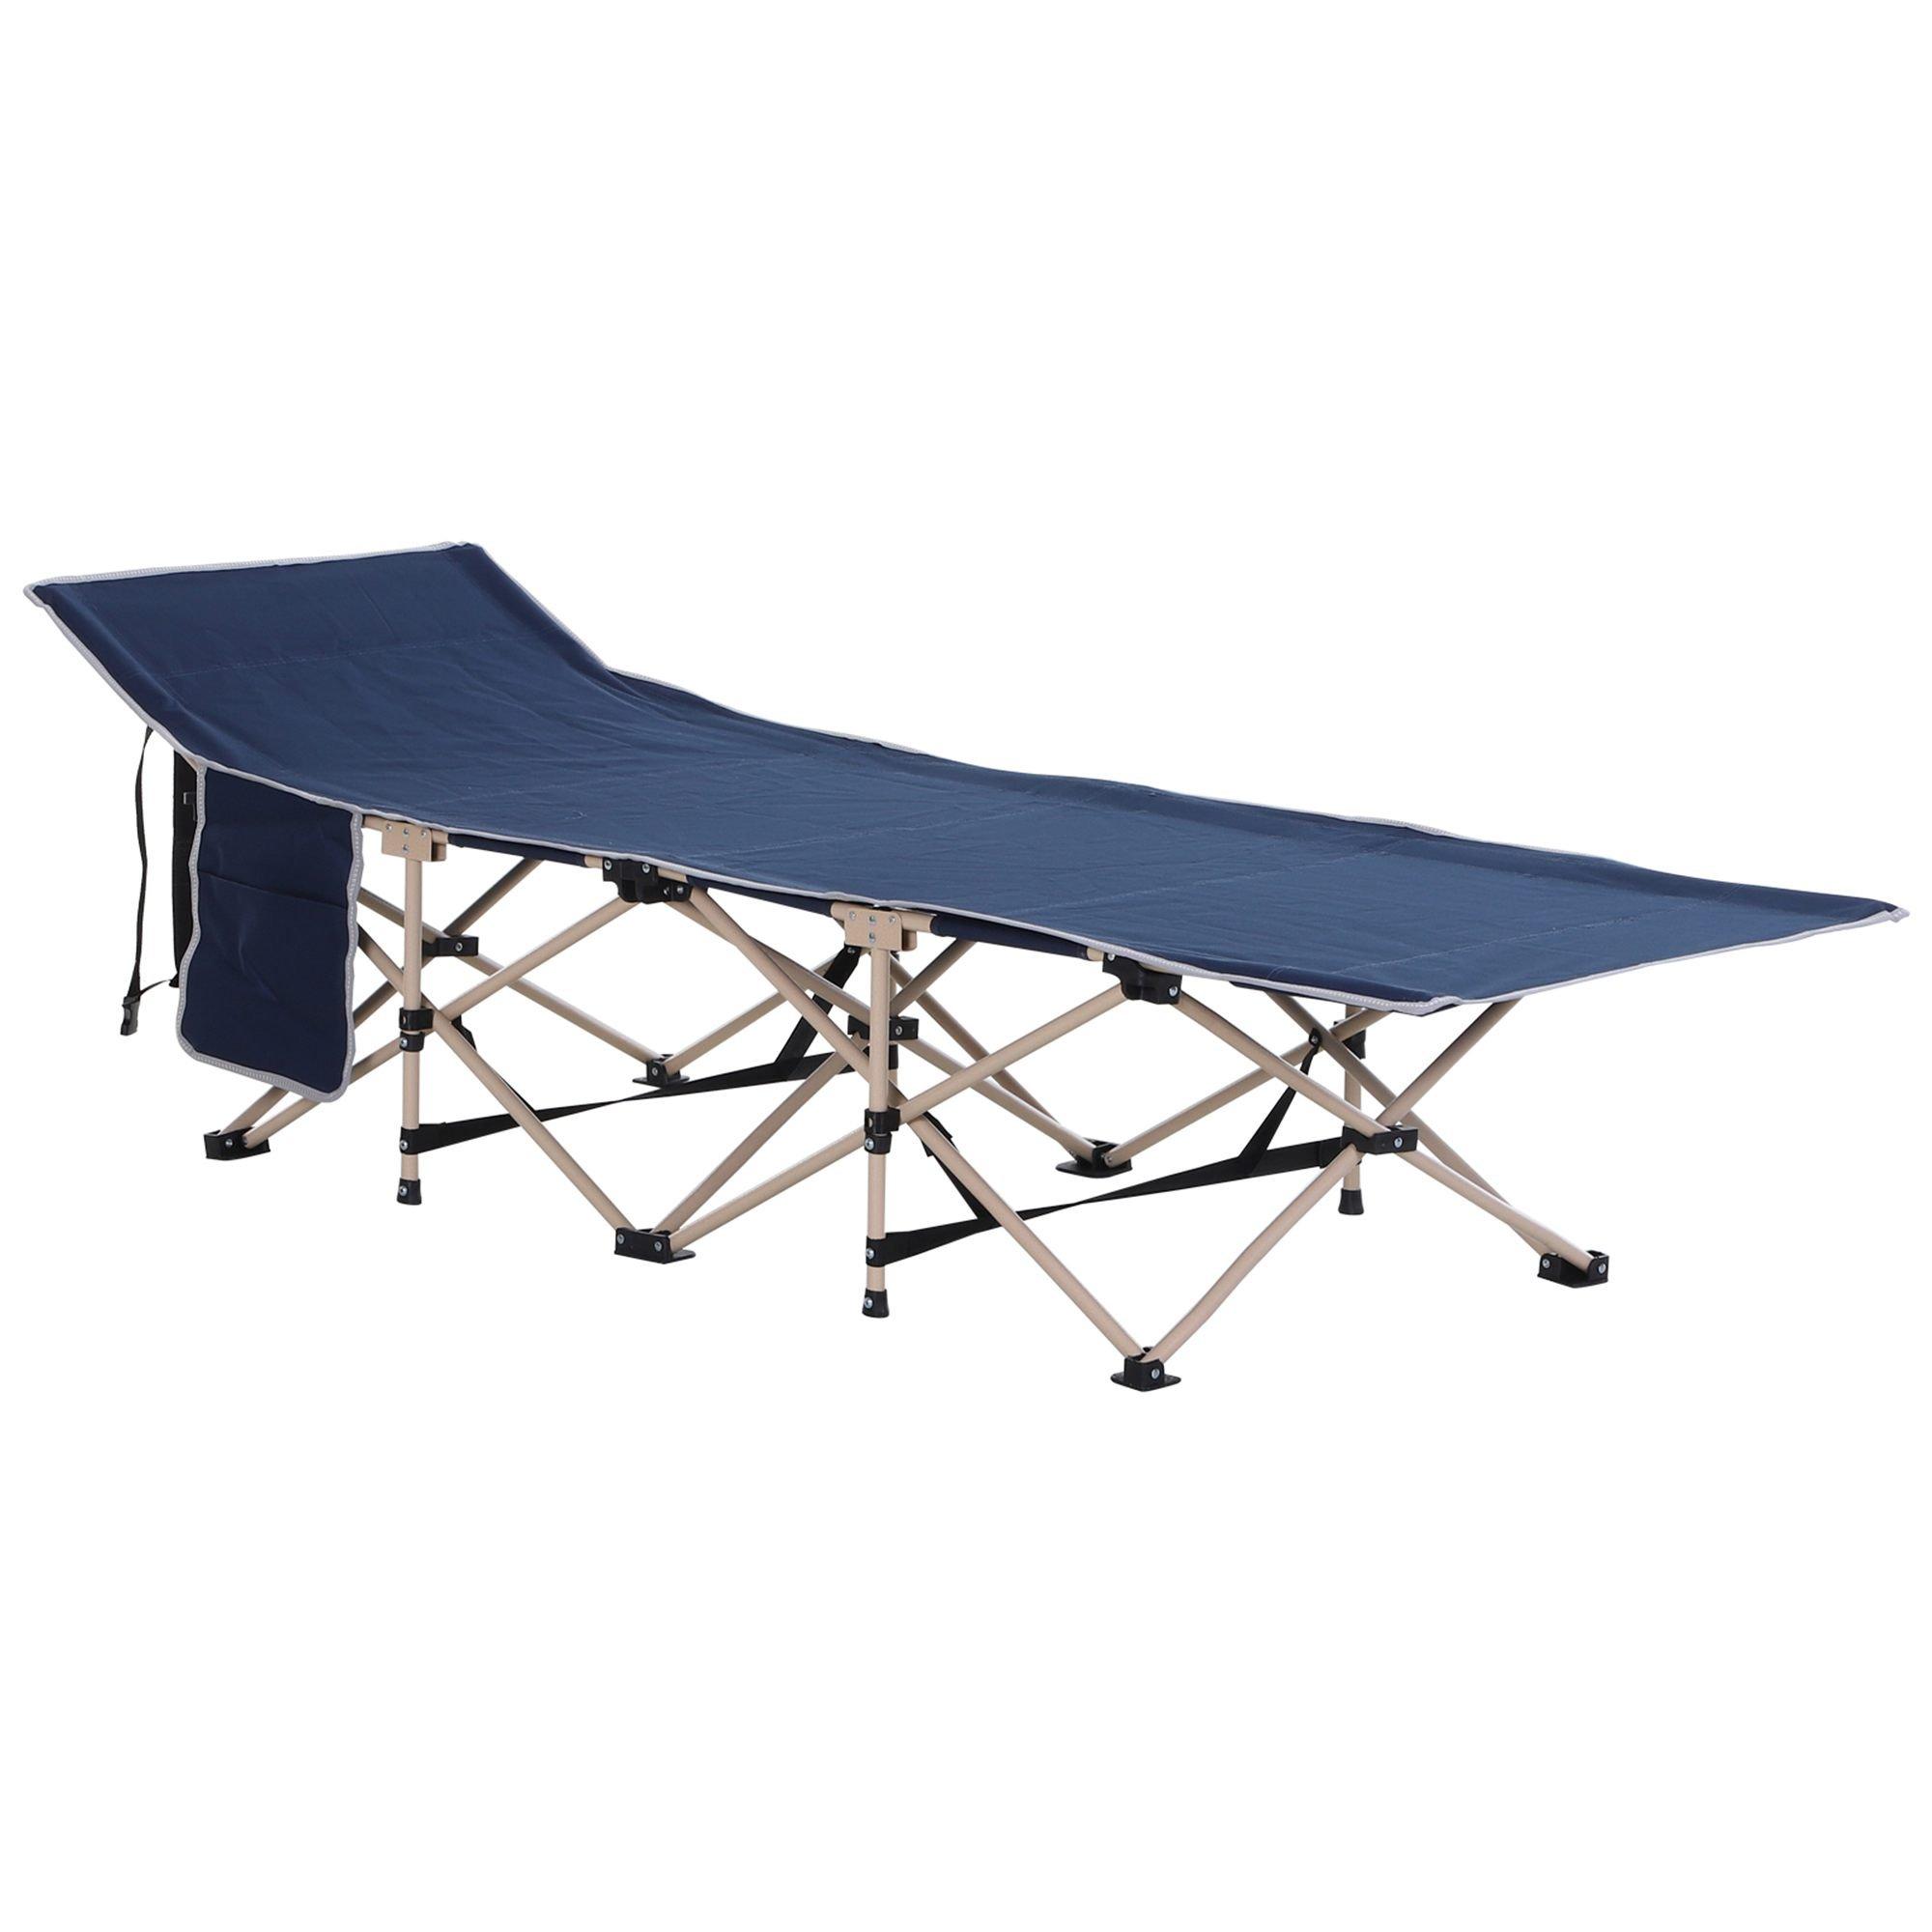 Single Person Folding Camping Cot Portable Camp Sleeping Bed w/ Carry Bag